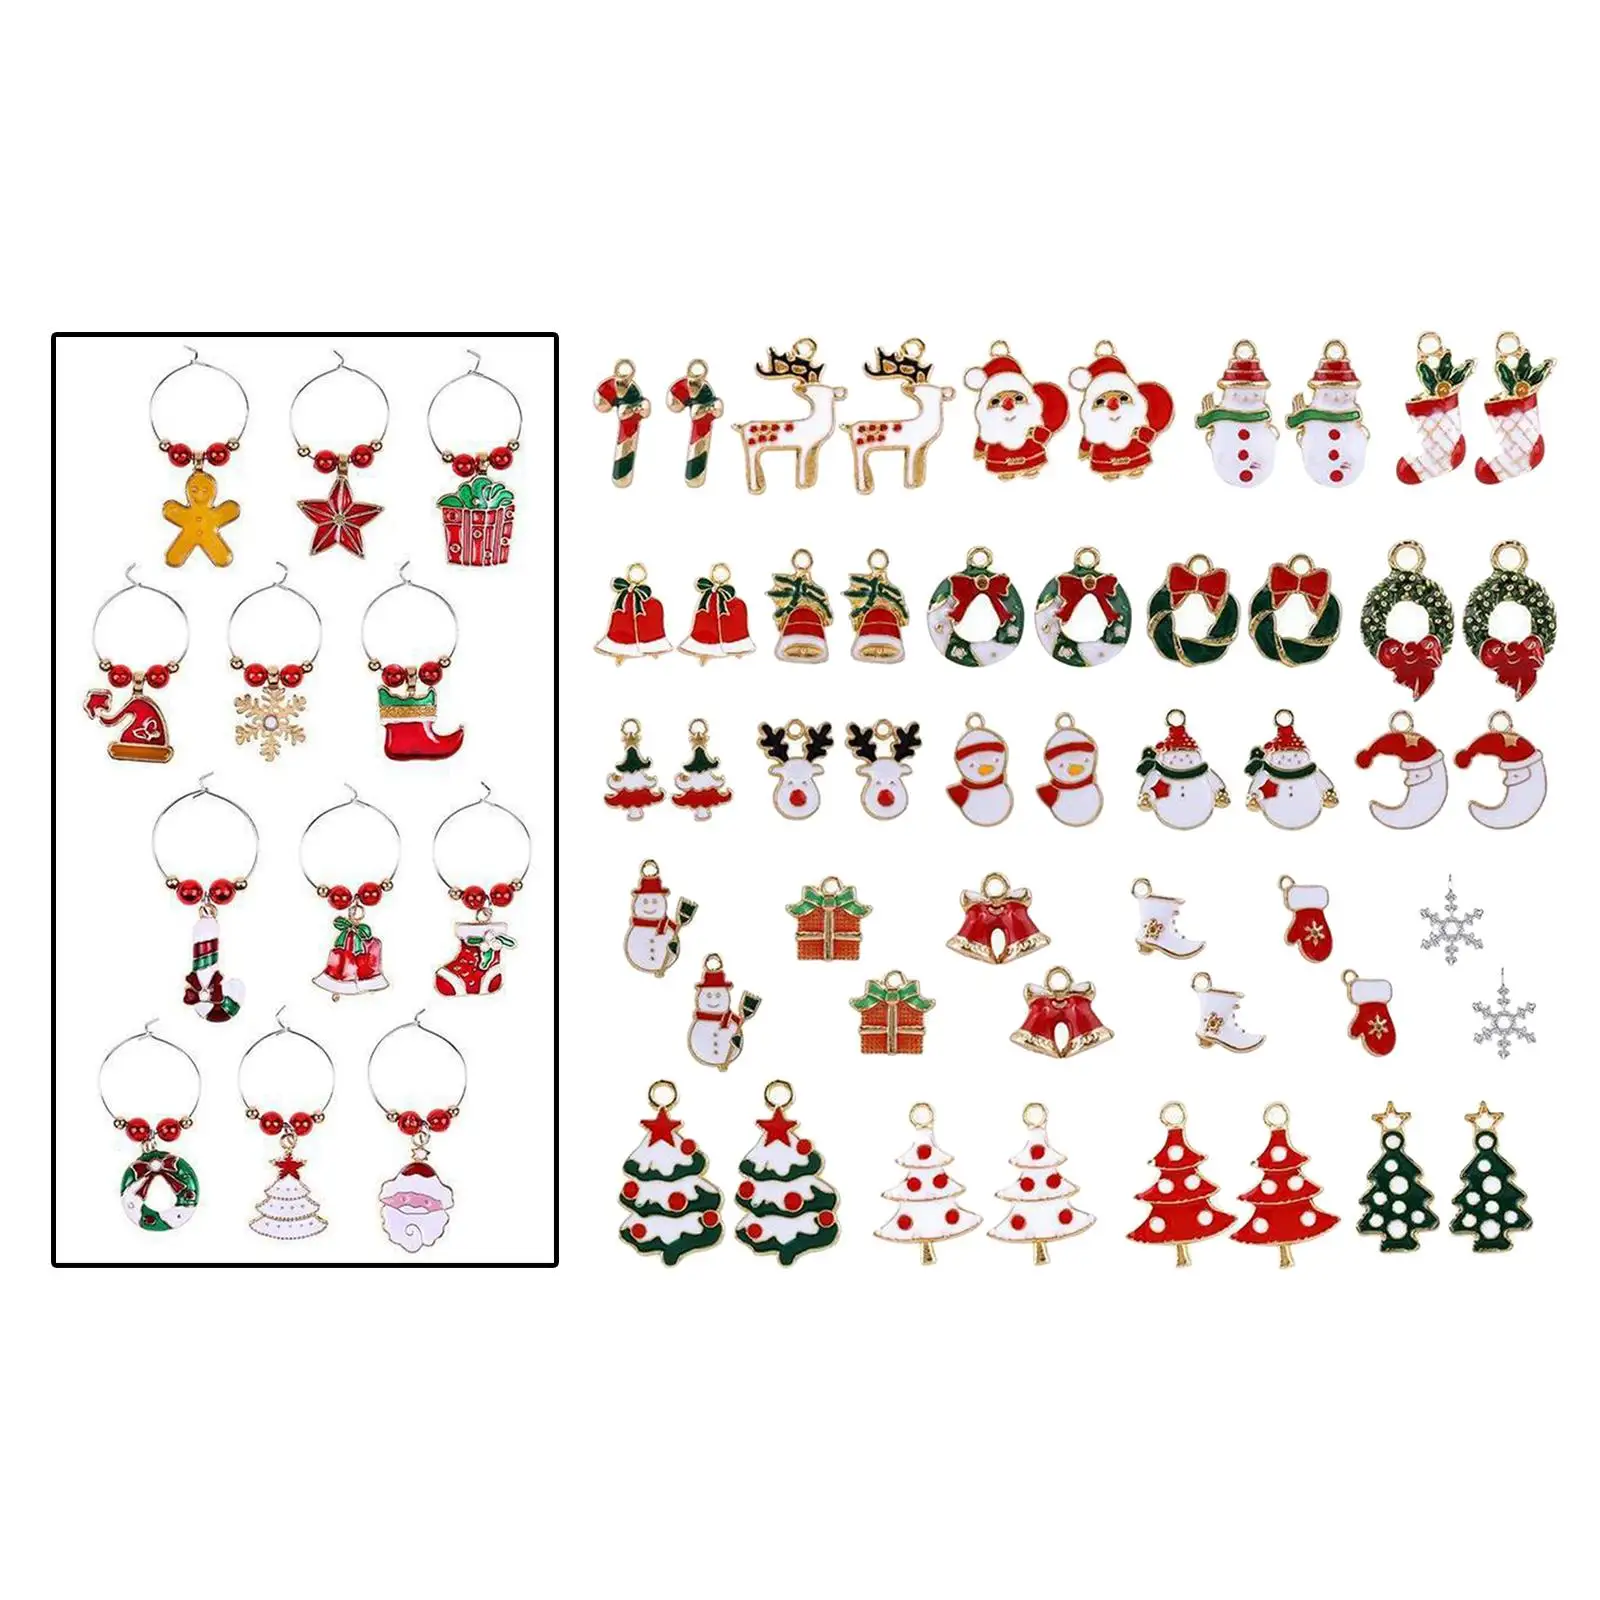 50 Christmas Charms Pendant Decorative for DIY Jewelry Making